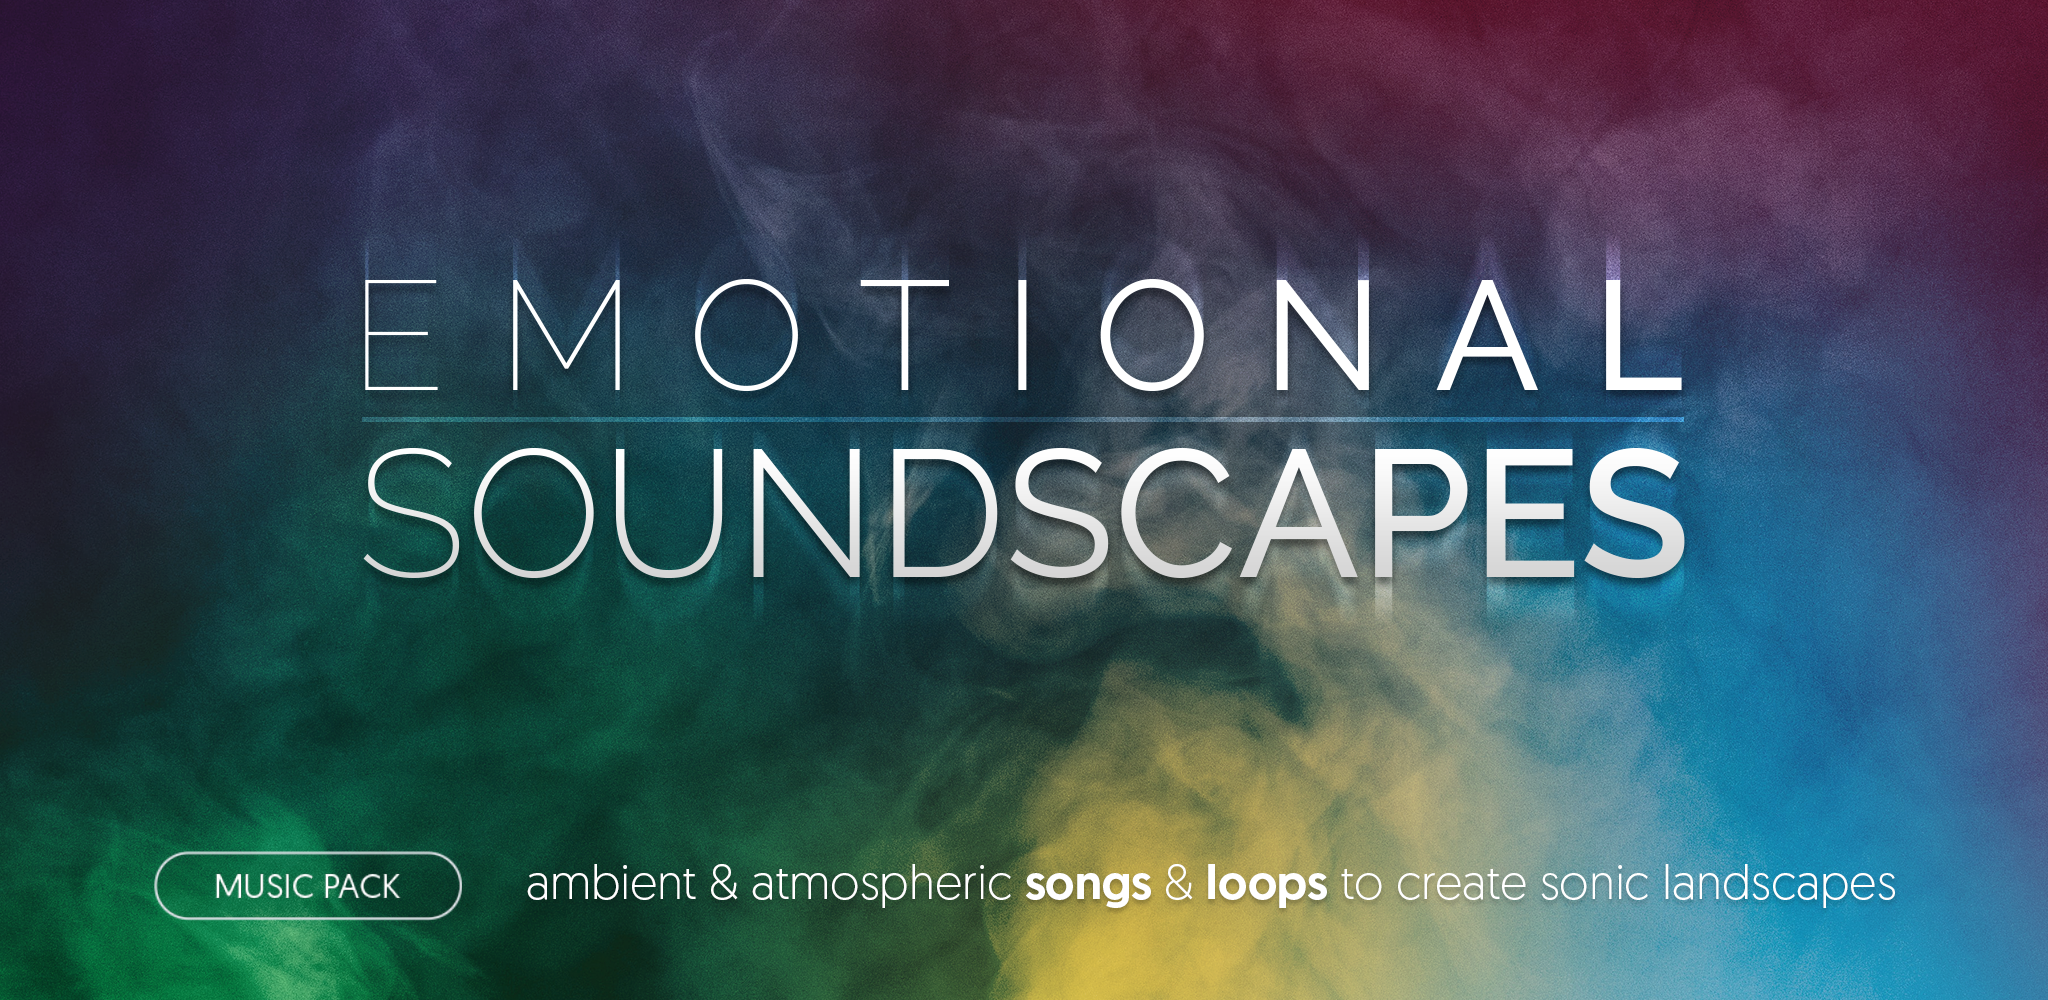 Emotional Soundscapes - music pack